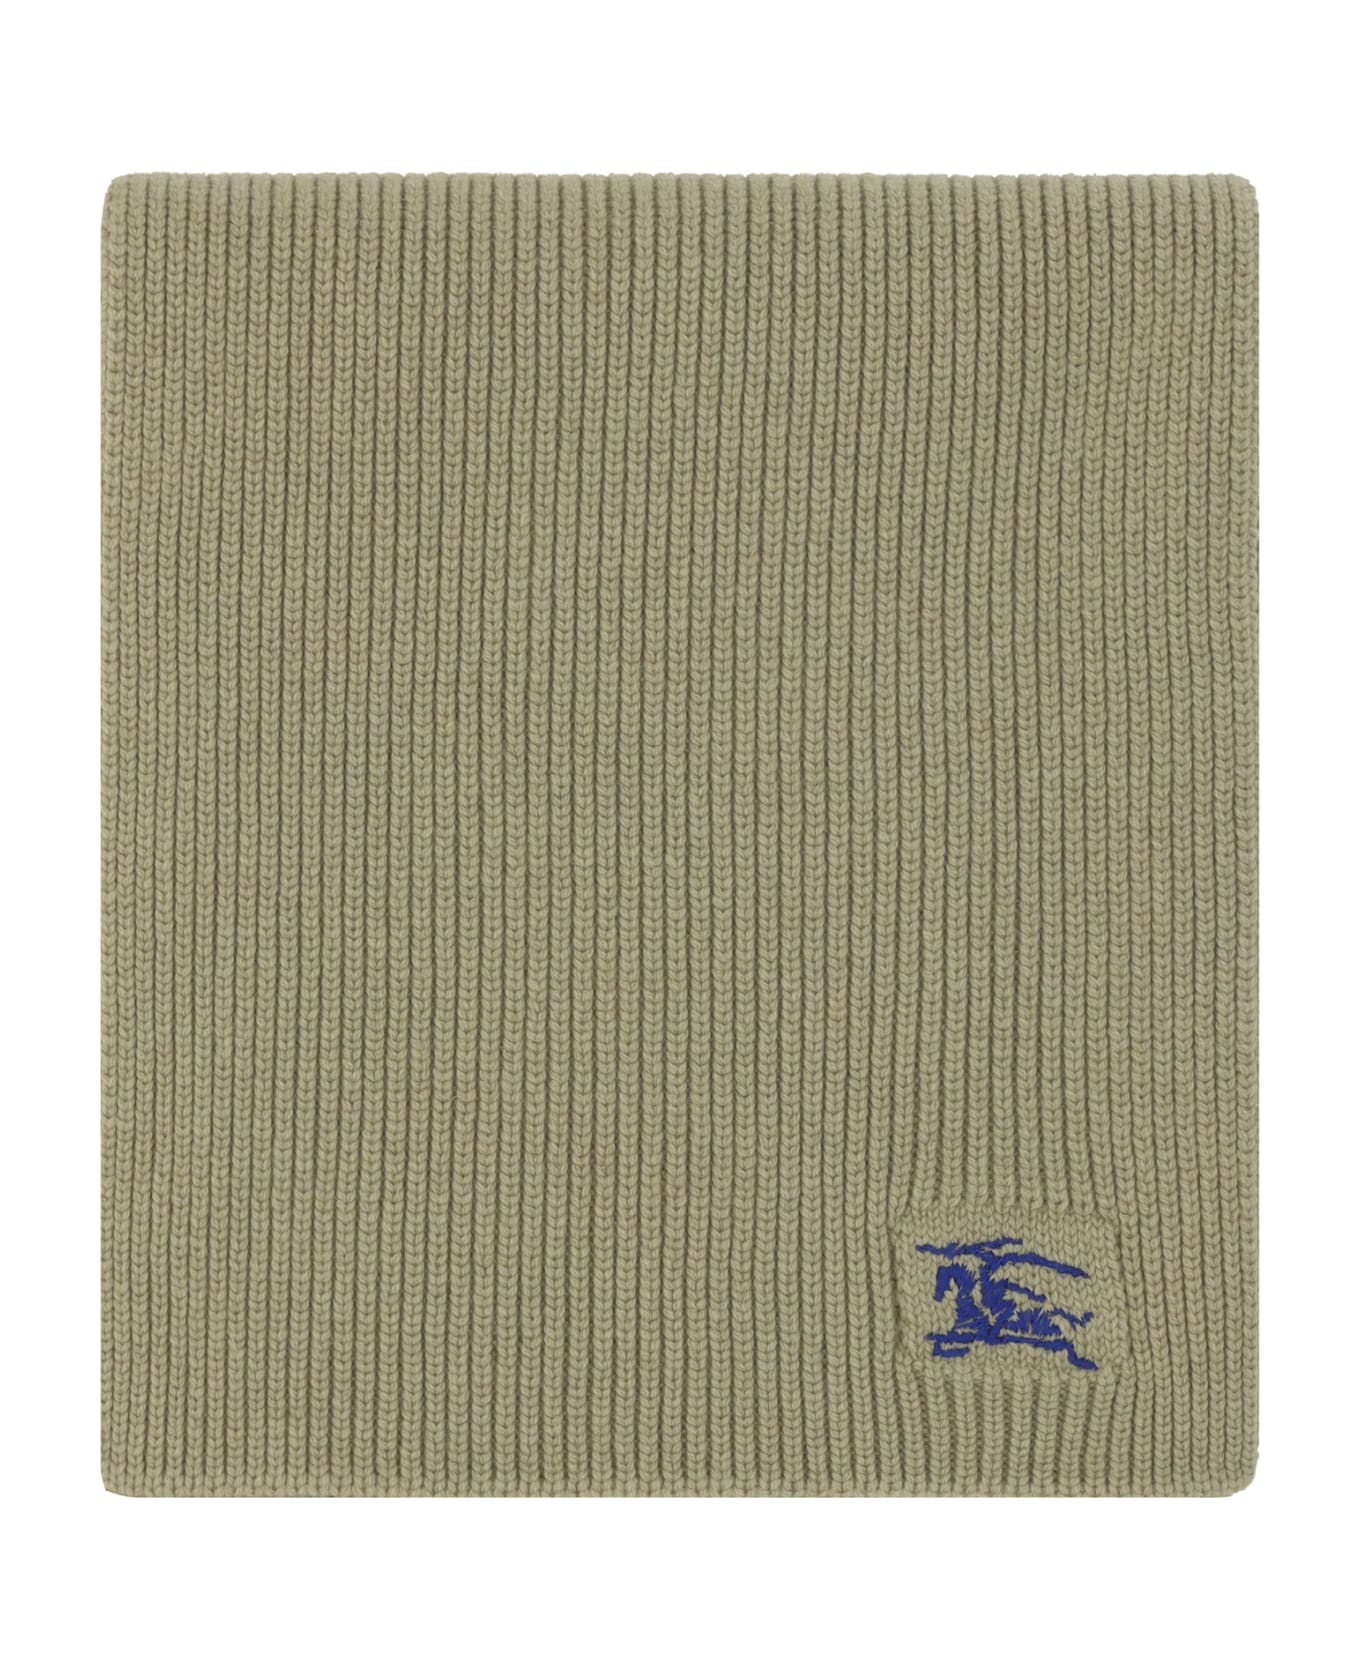 Burberry Green Cashmere Scarf - Green